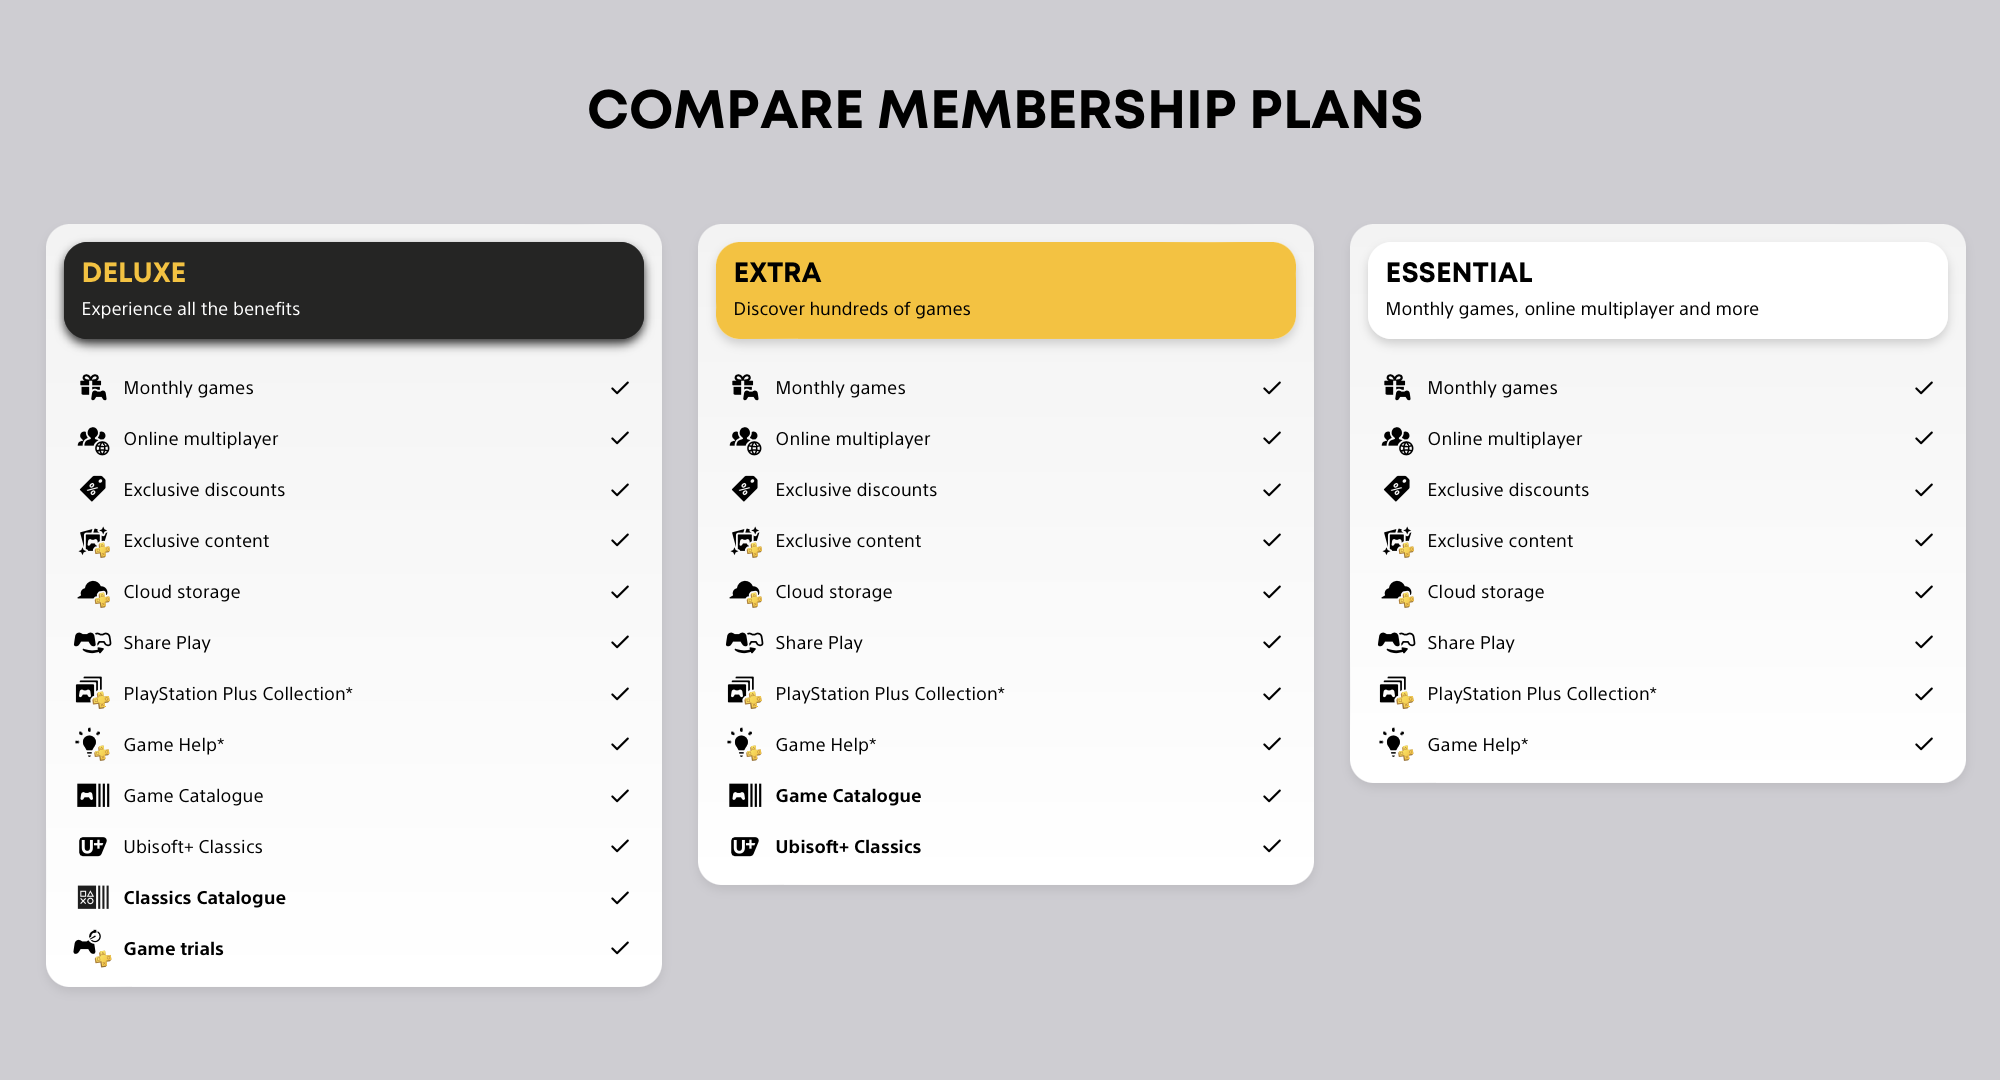 PS Plus - Comparison of subscriptions: benefits, content and price